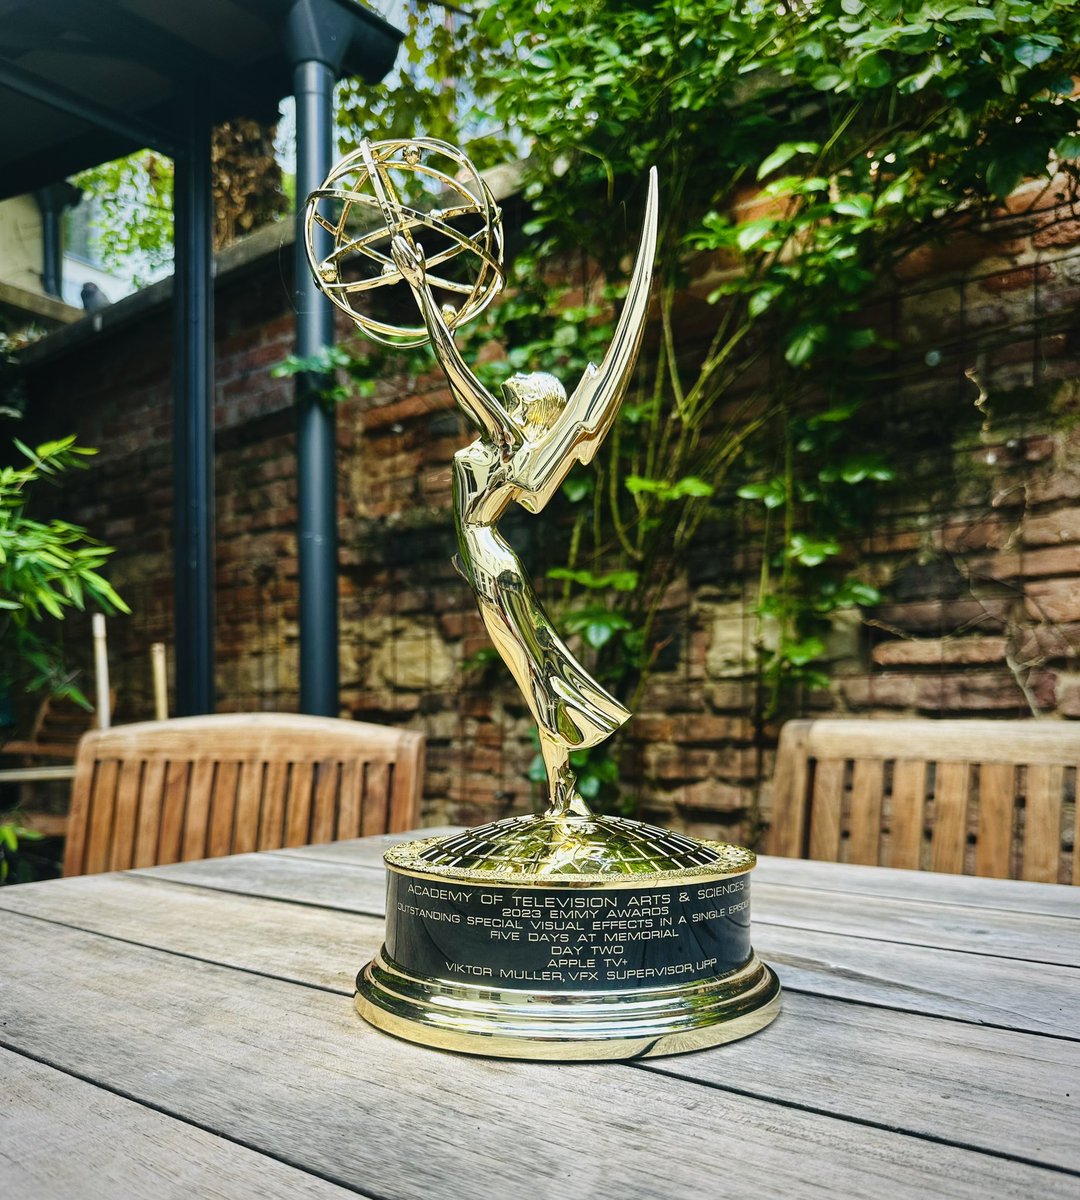 Our girl has arrived. 

Thank you to the @TelevisionAcad, the team from @AppleTV, the entire creative team from #FiveDaysAtMemorial and, of course everyone at UPP who worked to bring this powerful project to life on screen. #EmmyWinner #Emmys #PrimetimeEmmyAwards